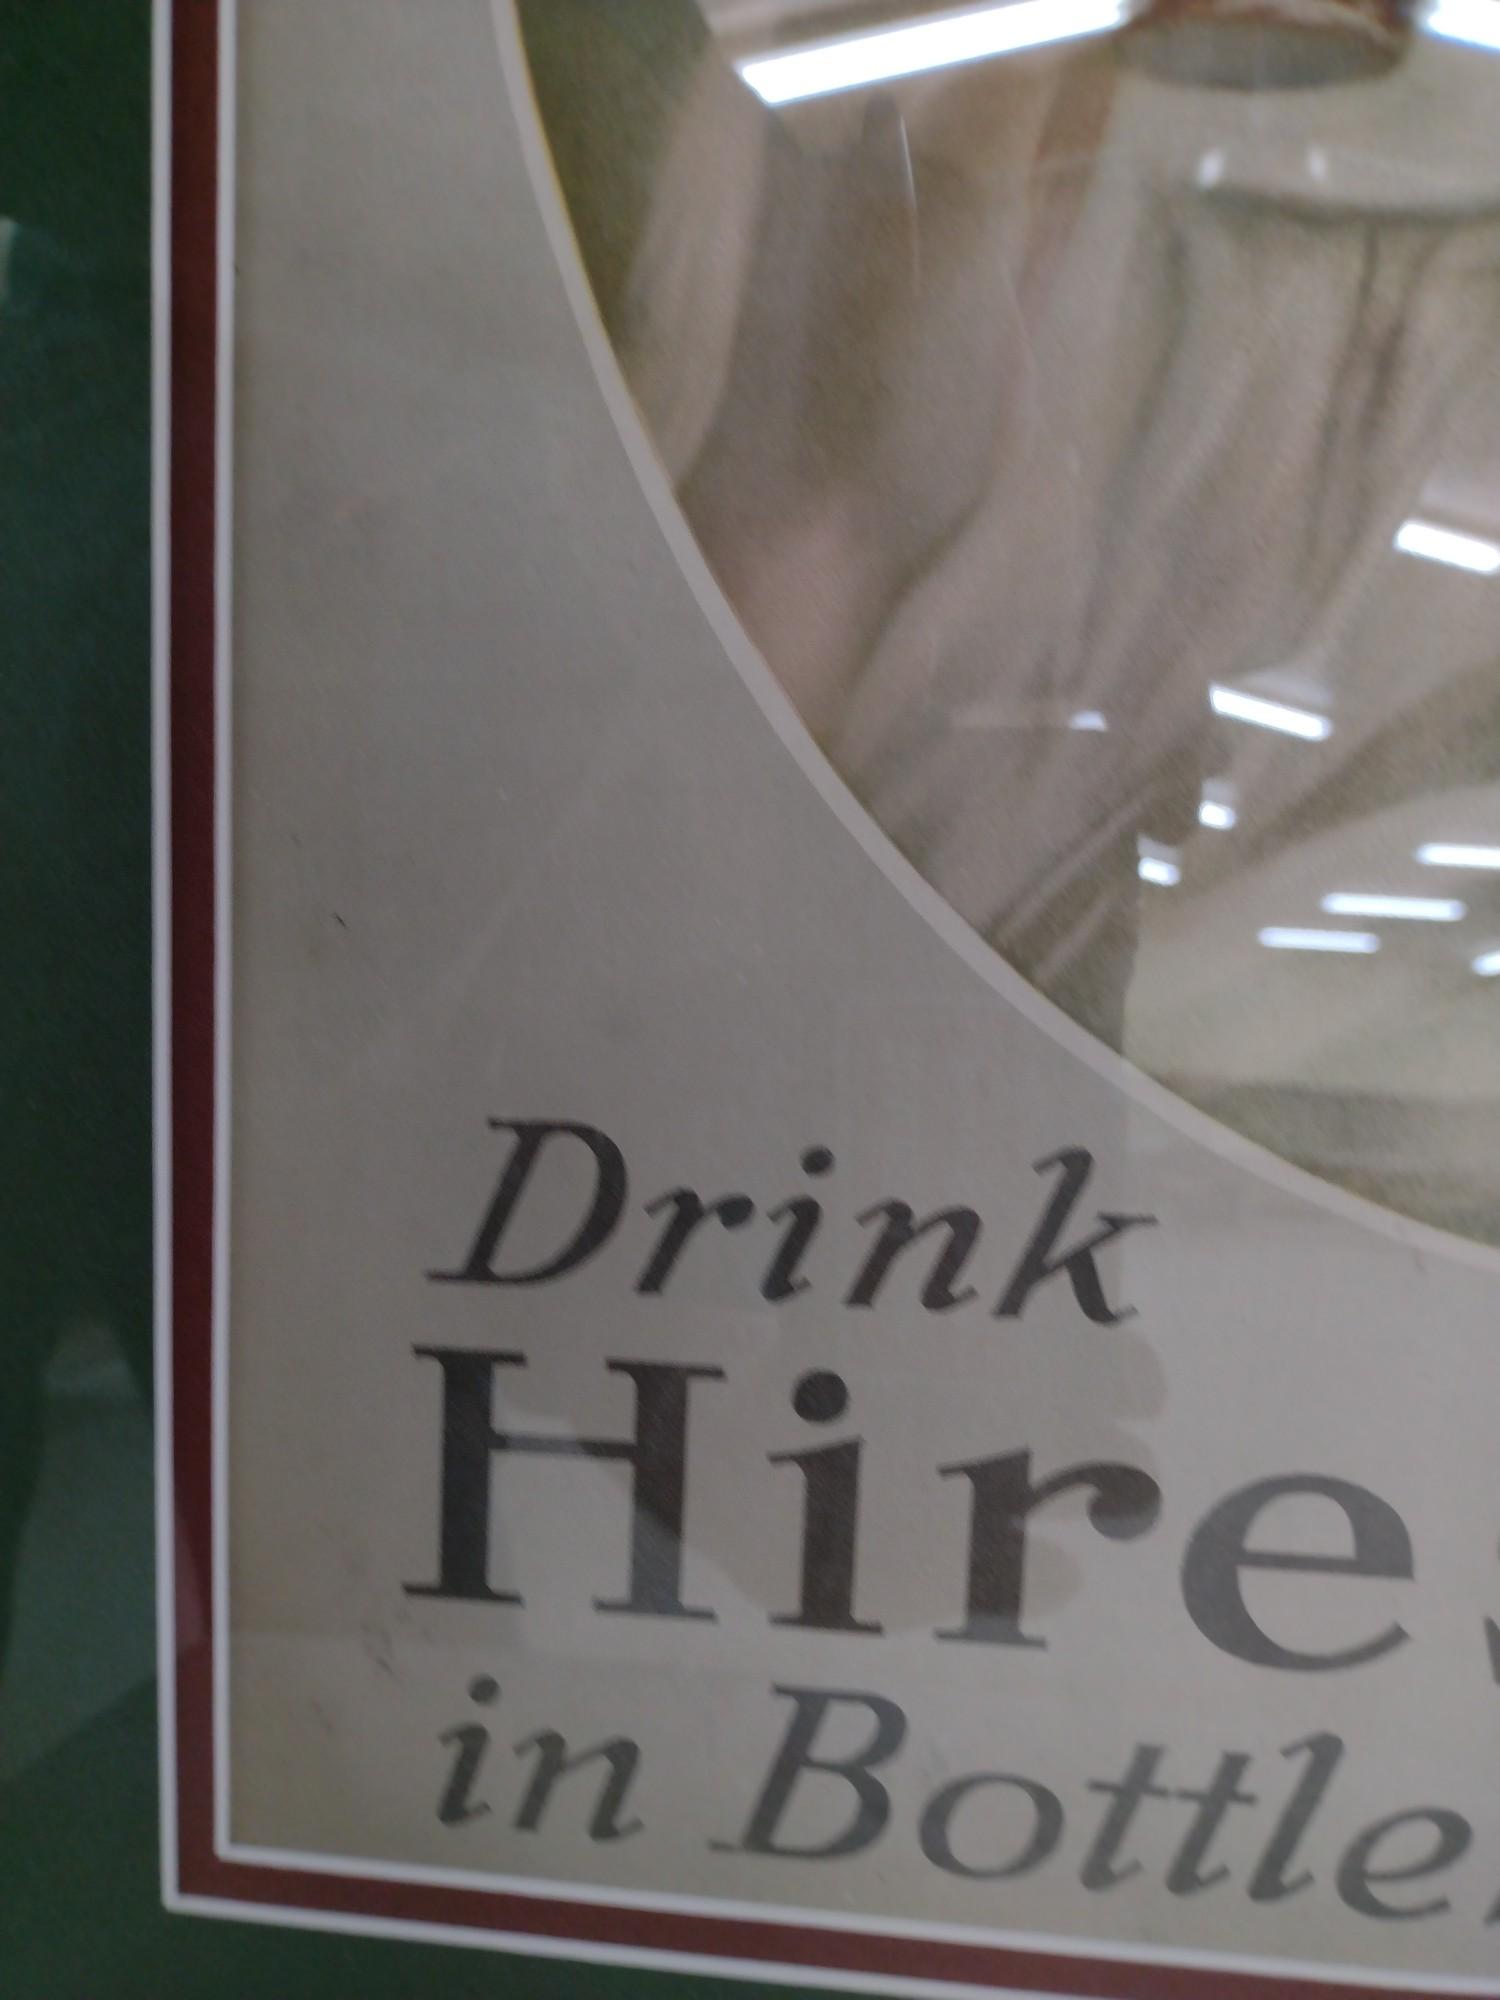 Drink Hires Advertising Art by W. Haskell Coffin